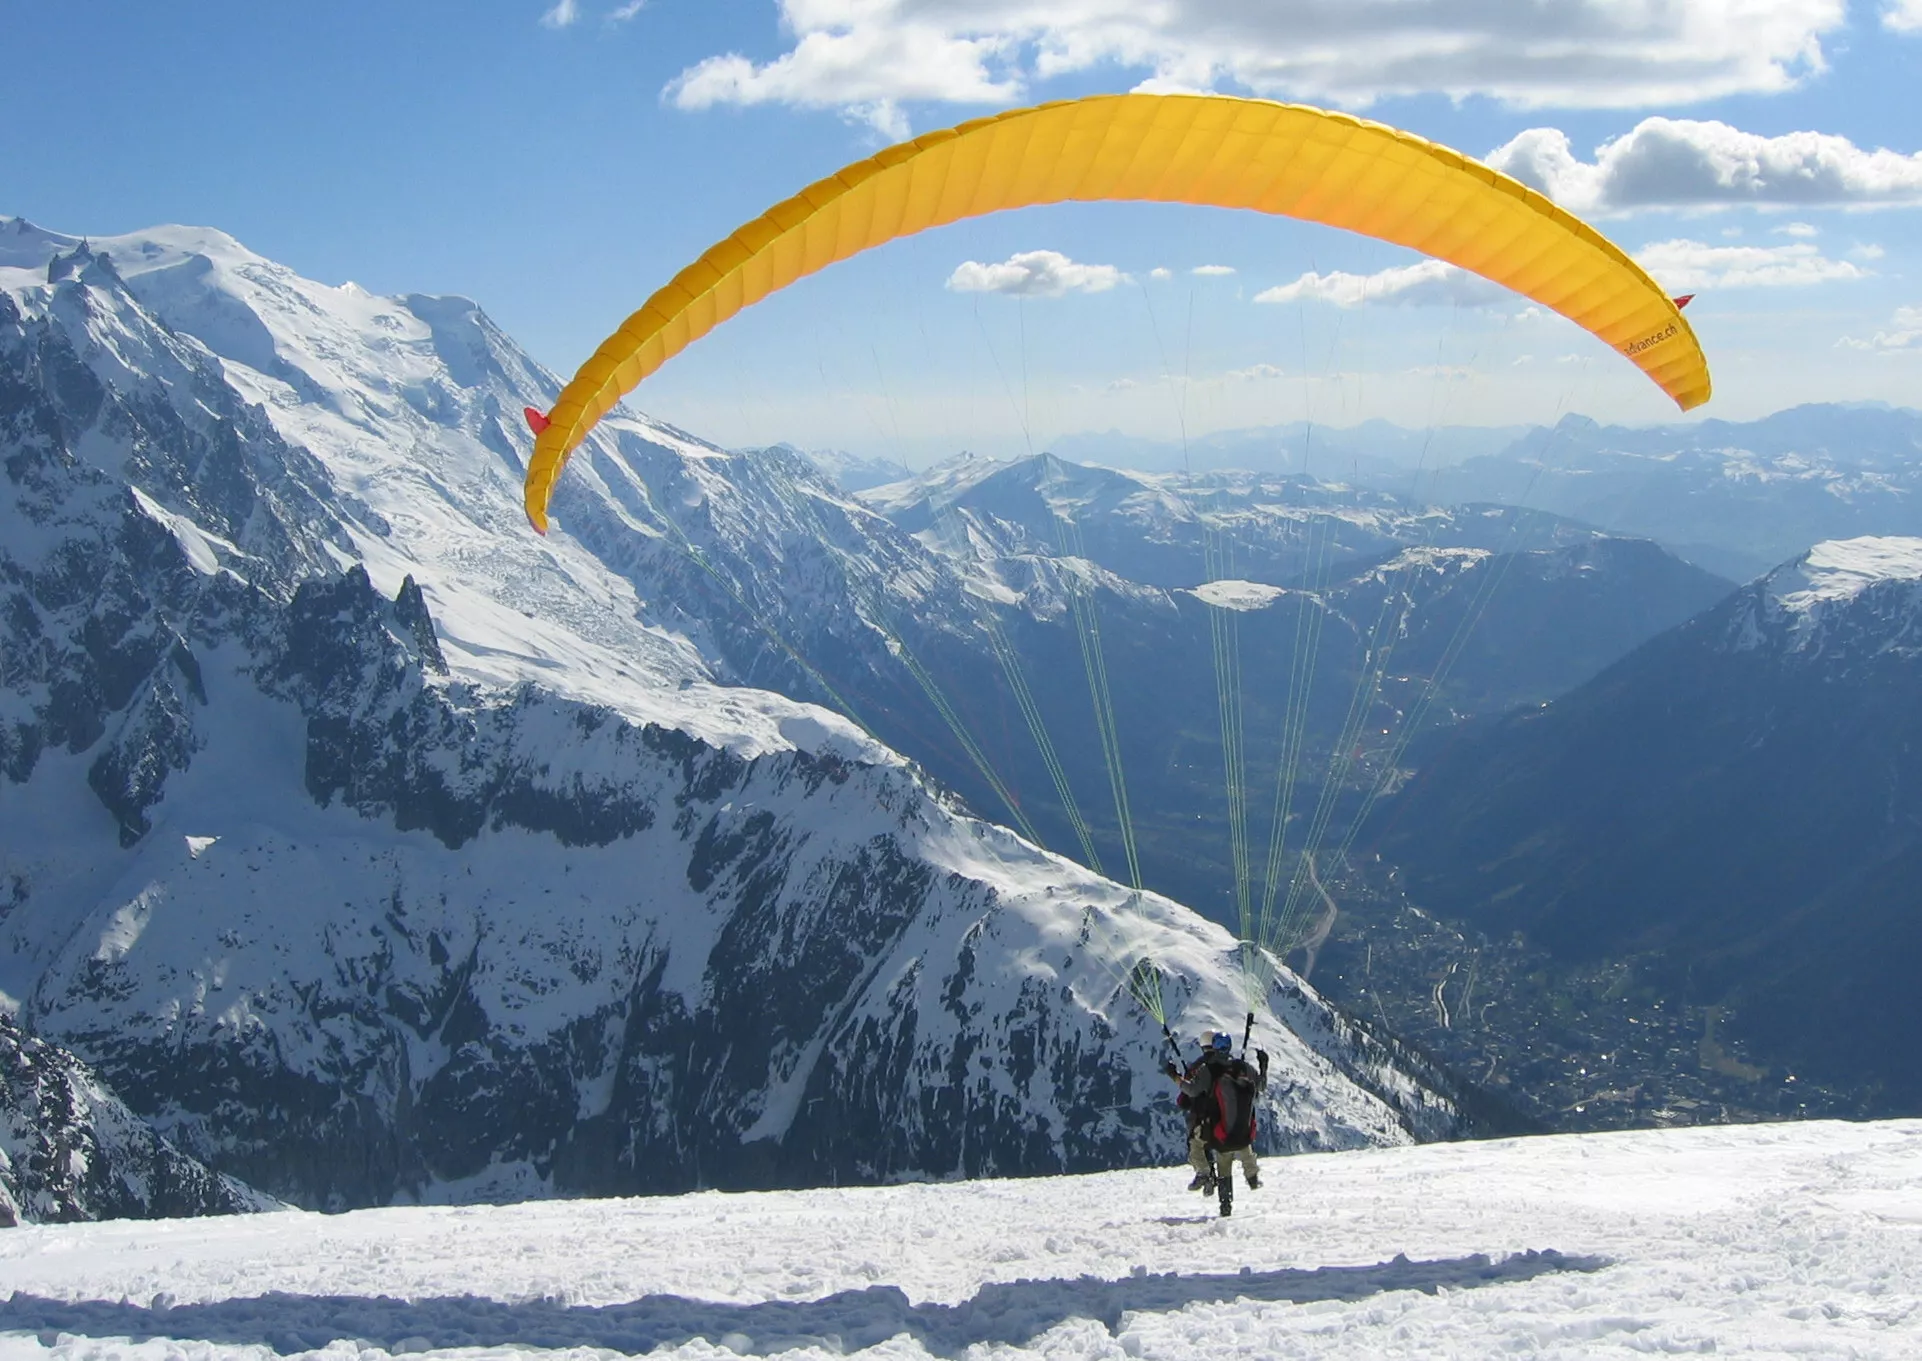 Chamonix Paragliding in France, Europe | Paragliding - Rated 1.6